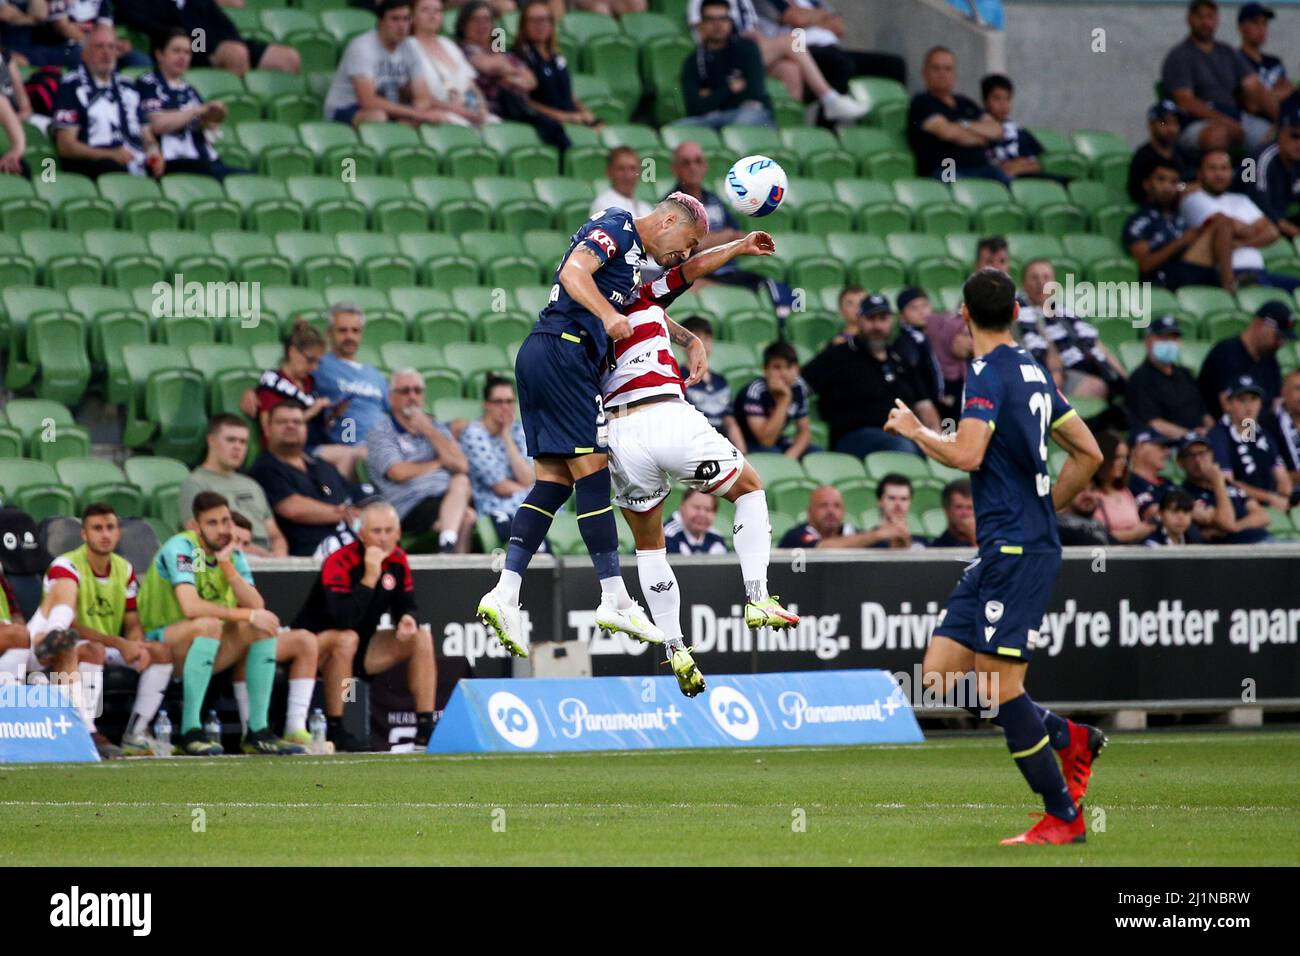 Melbourne, Australia, 27 March, 2022. Jason Davidson of Melbourne Victory heads the ball during the A-League soccer match between Melbourne Victory and Western Sydney Wanderers FC. Credit: Dave Hewison/Speed Media/Alamy Live News Stock Photo